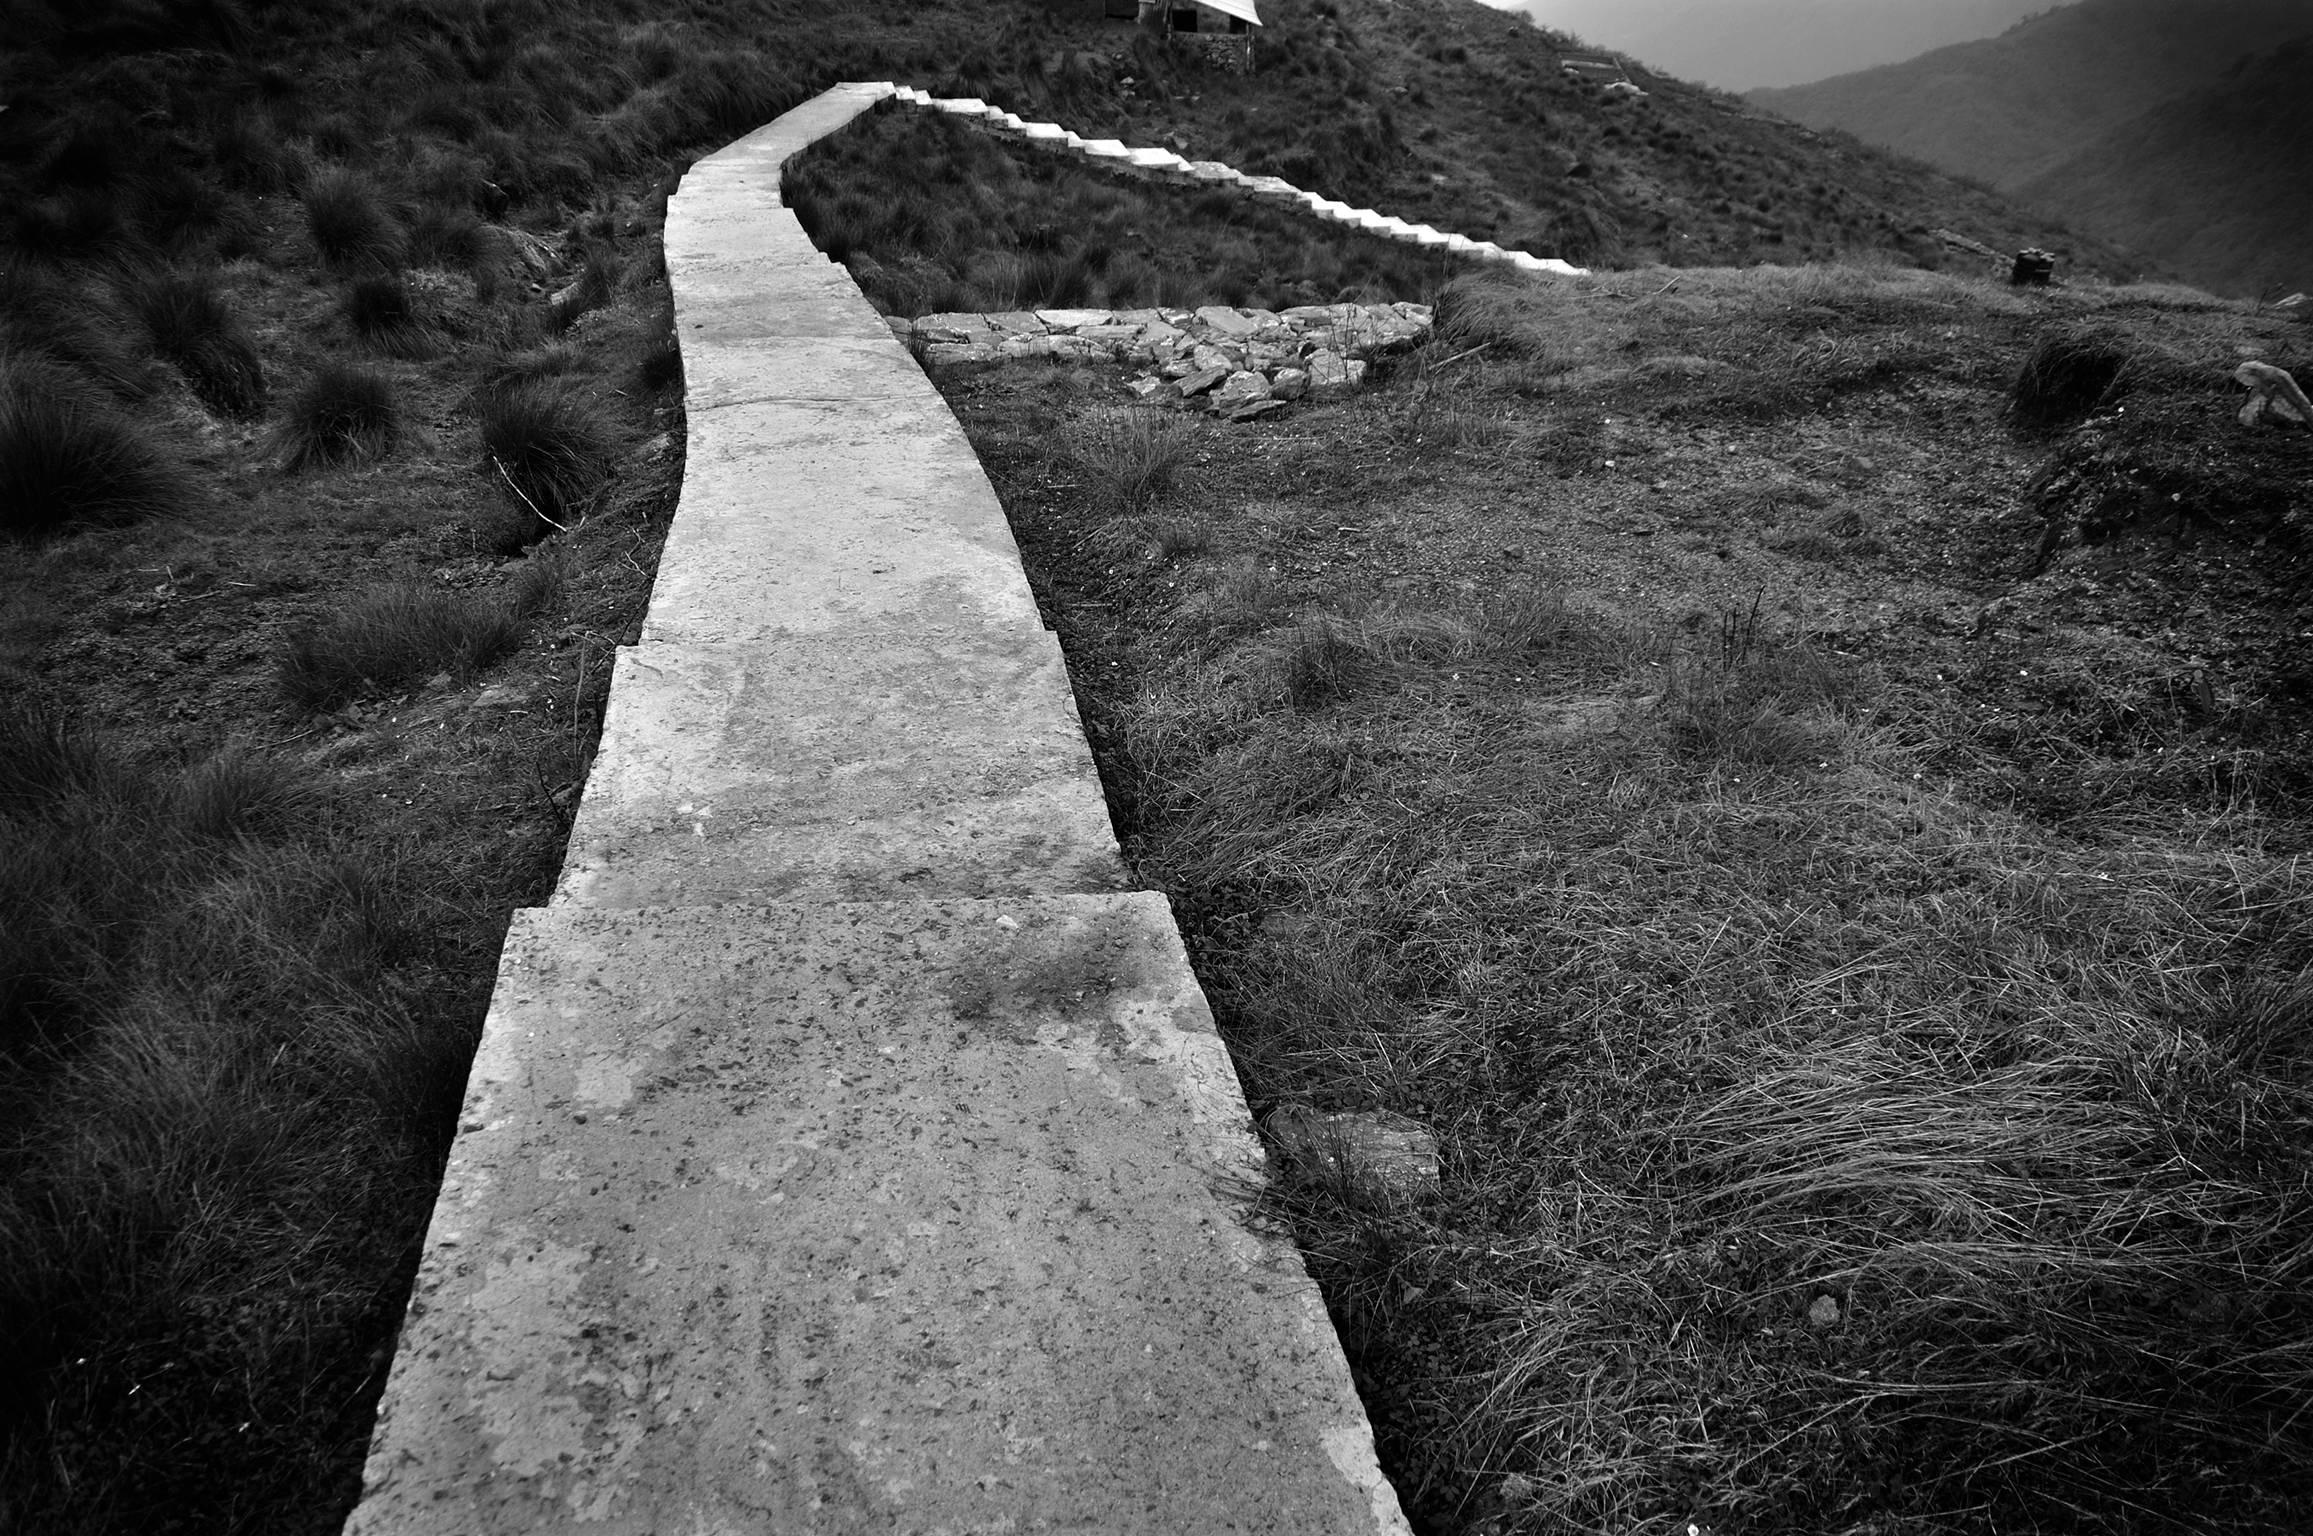 Hilly Stairs, Scenery, Black & White Photography by Indian Artist "In Stock"